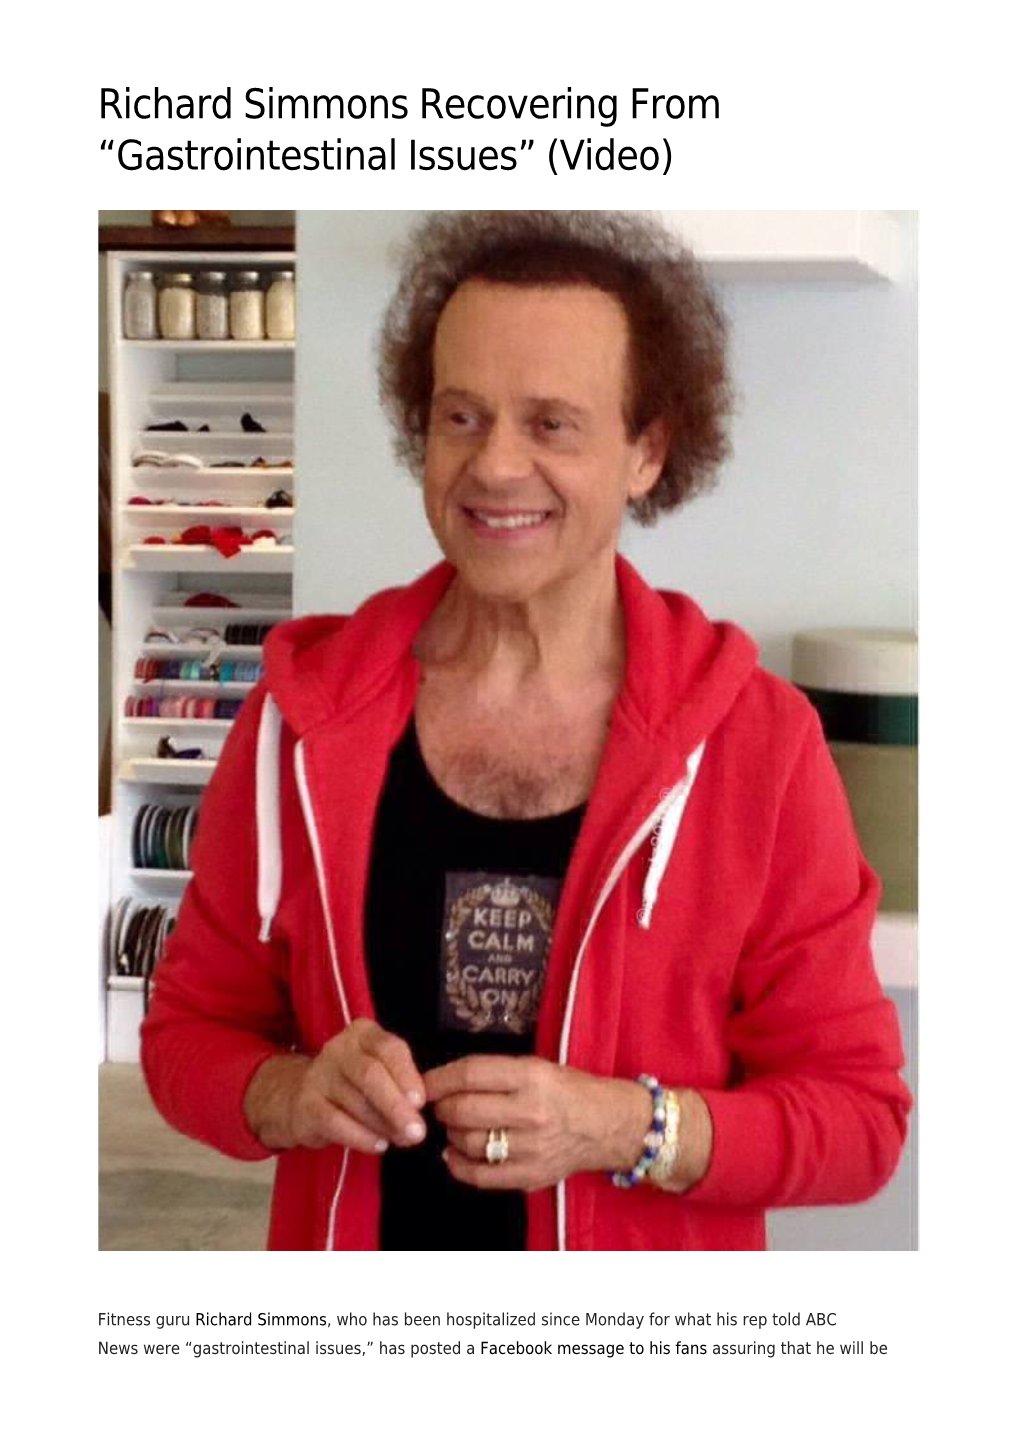 Richard Simmons Recovering from “Gastrointestinal Issues” (Video)